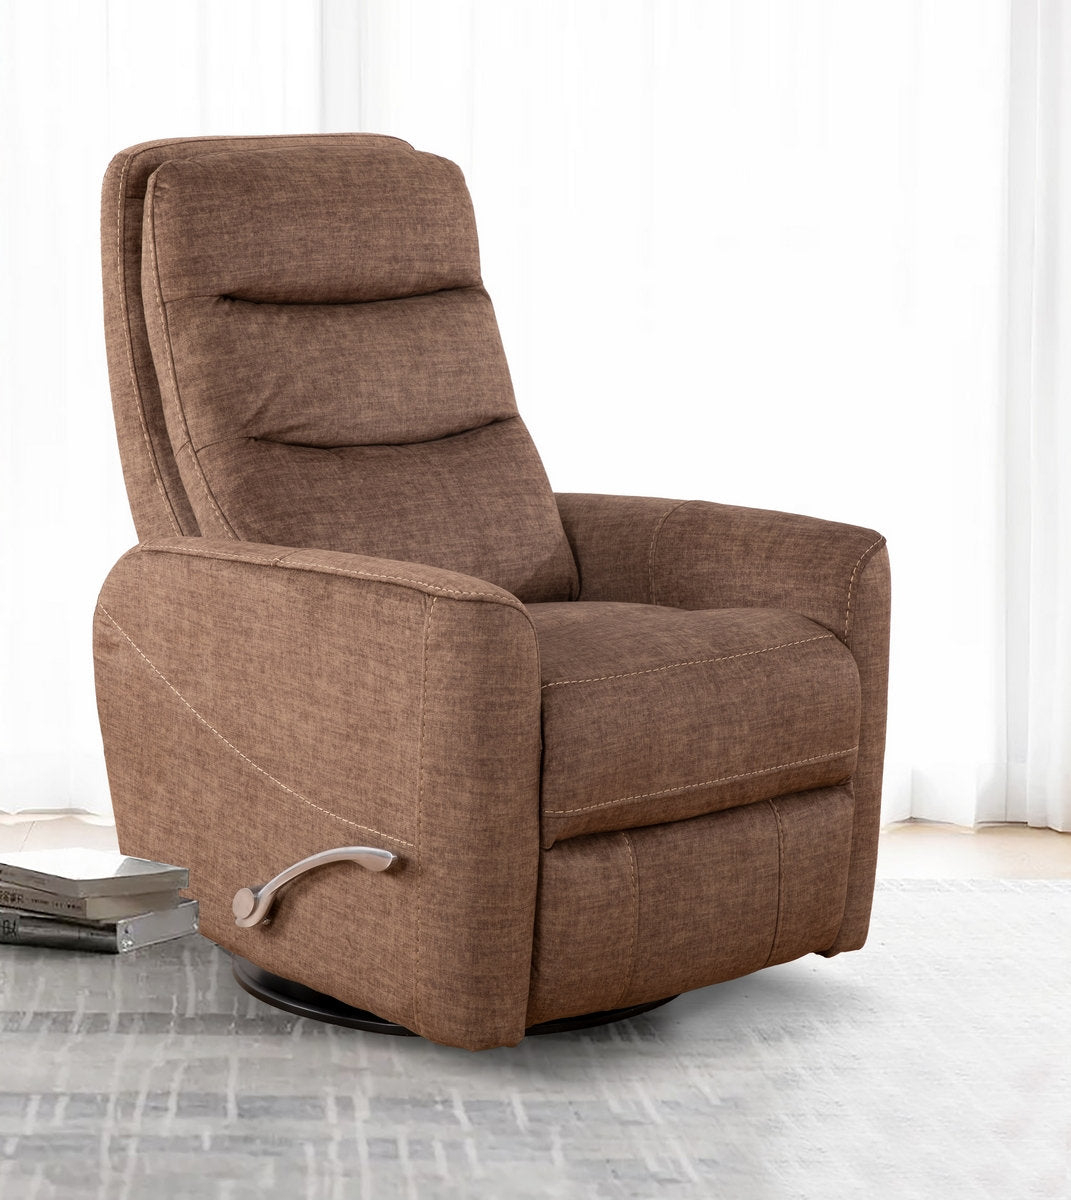 Recliner Chair - Selacy Furniture Toronto